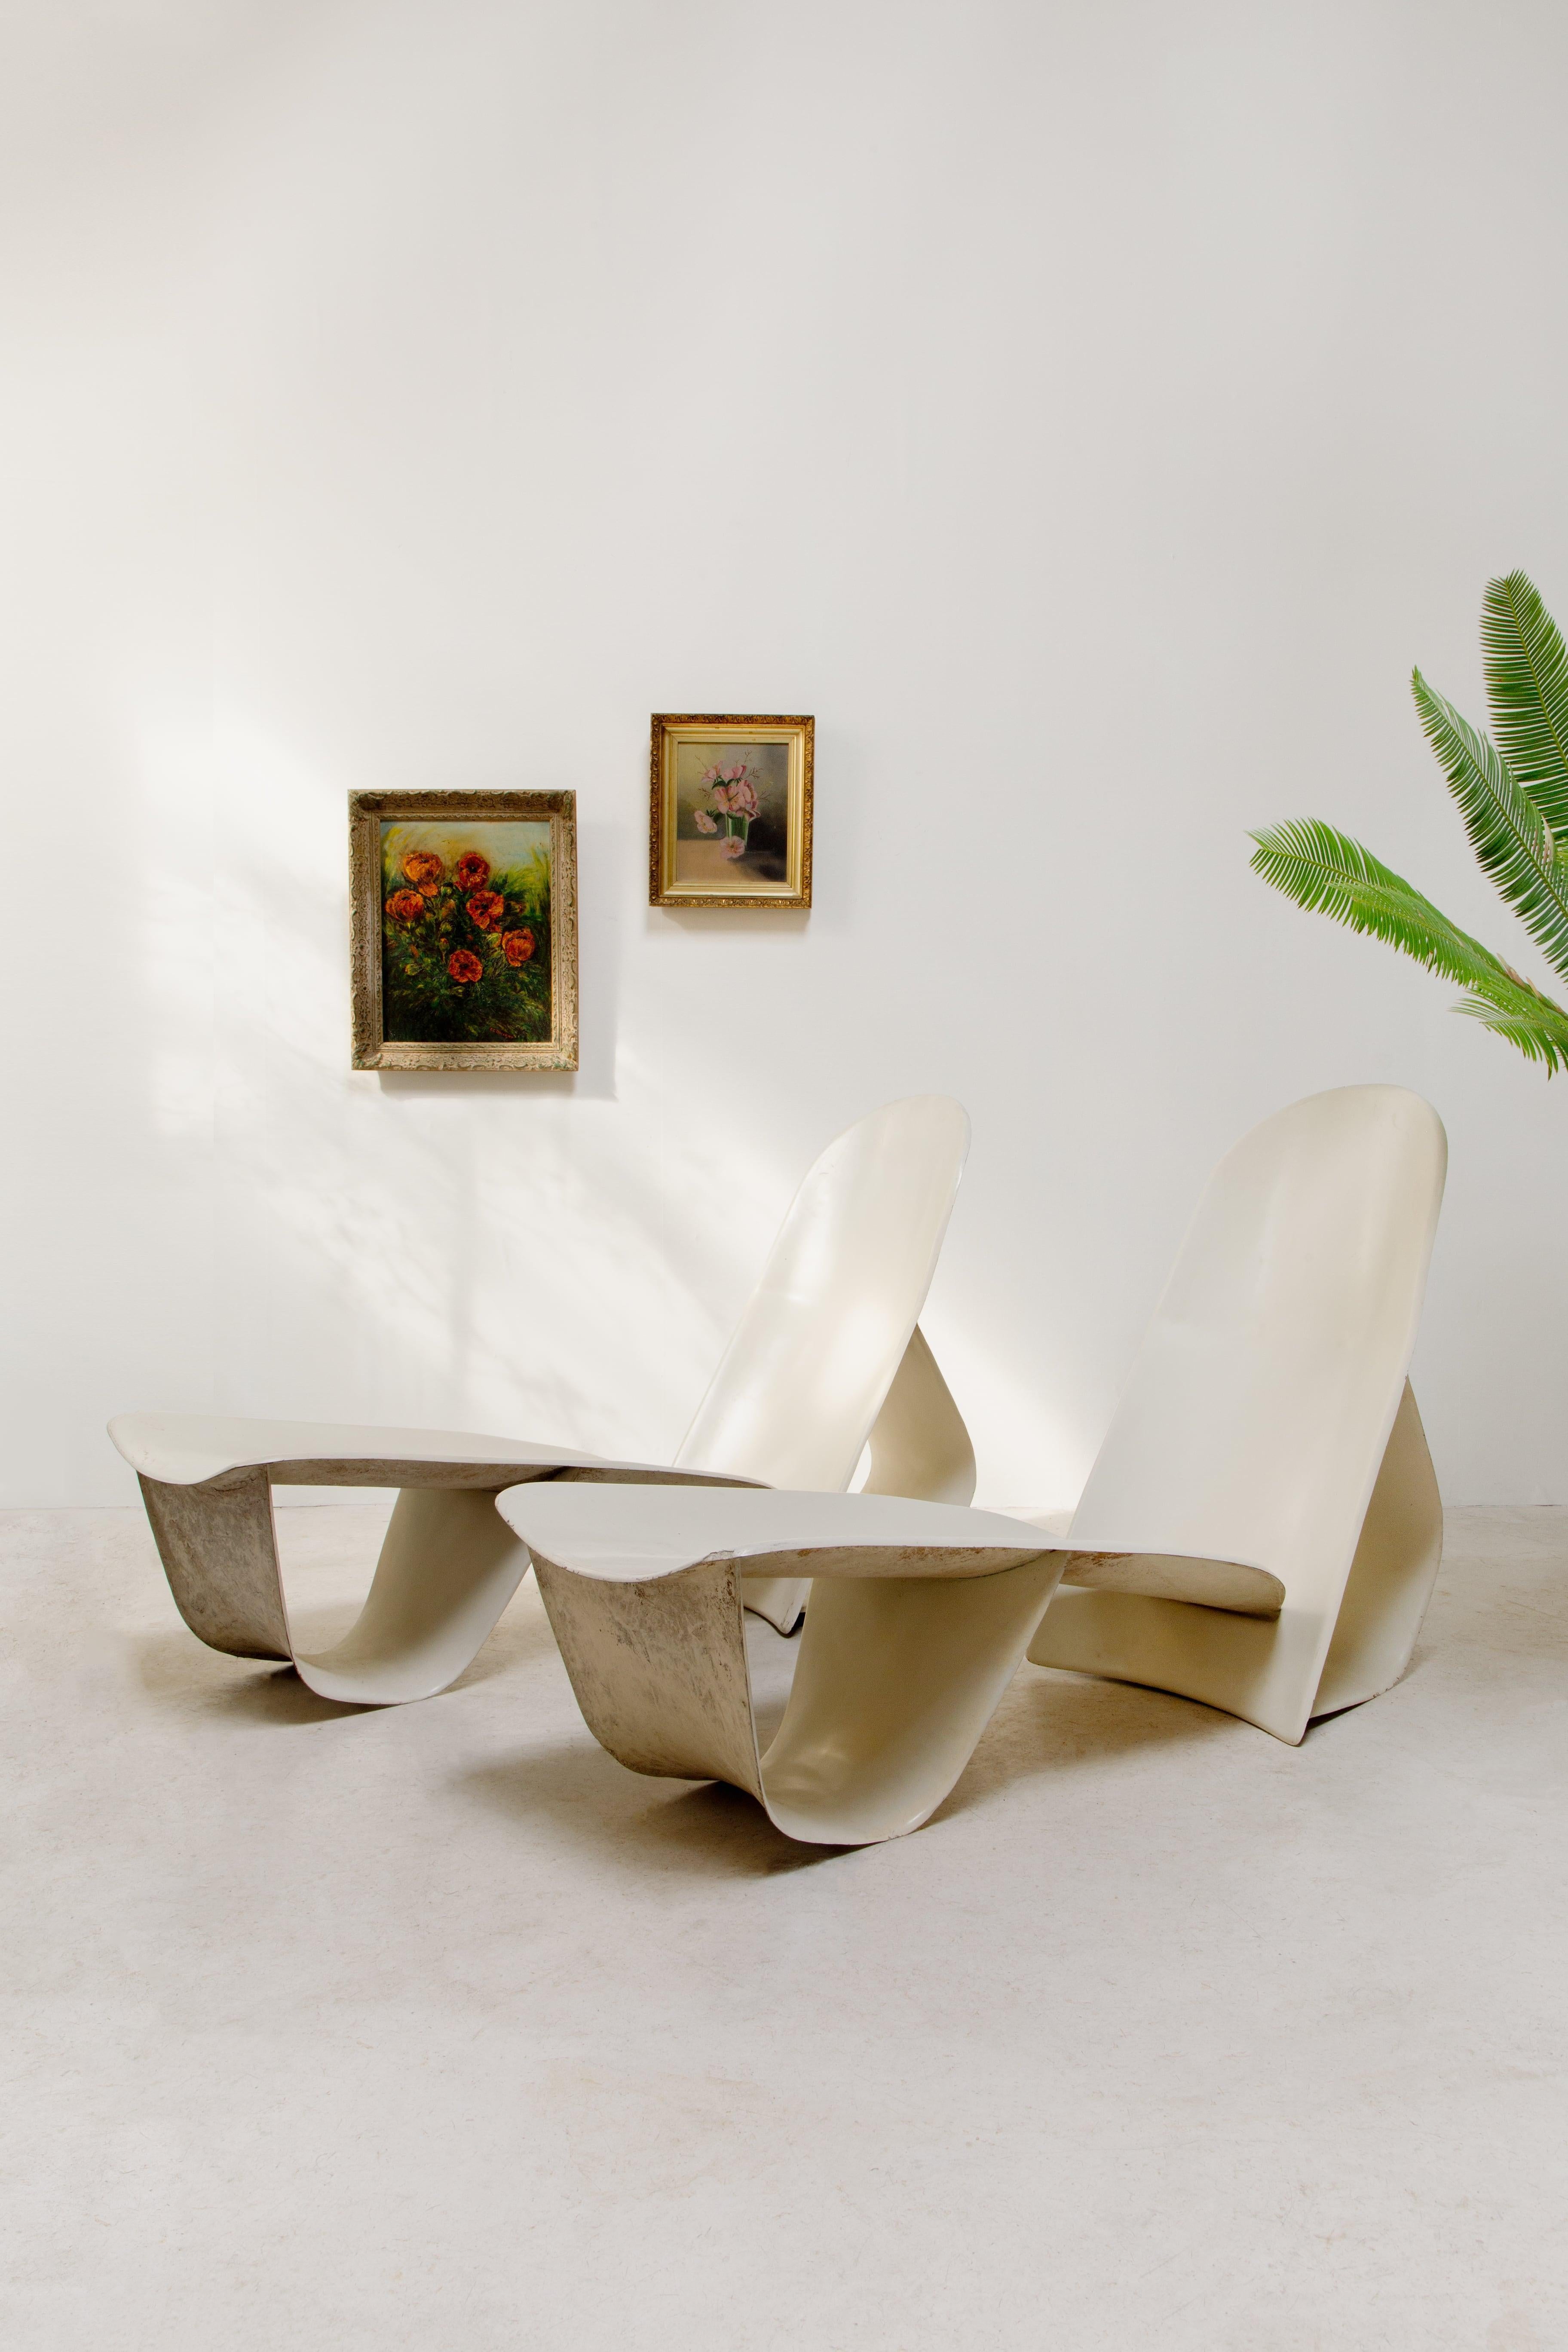 This exceptional collection comprises t adjustable longue chaises in a classic white lacquer finish, designed by Po Shun Leong during the 1970s. The renowned Aca chaise lounge design received an honorable mention at the Knoll International Furniture